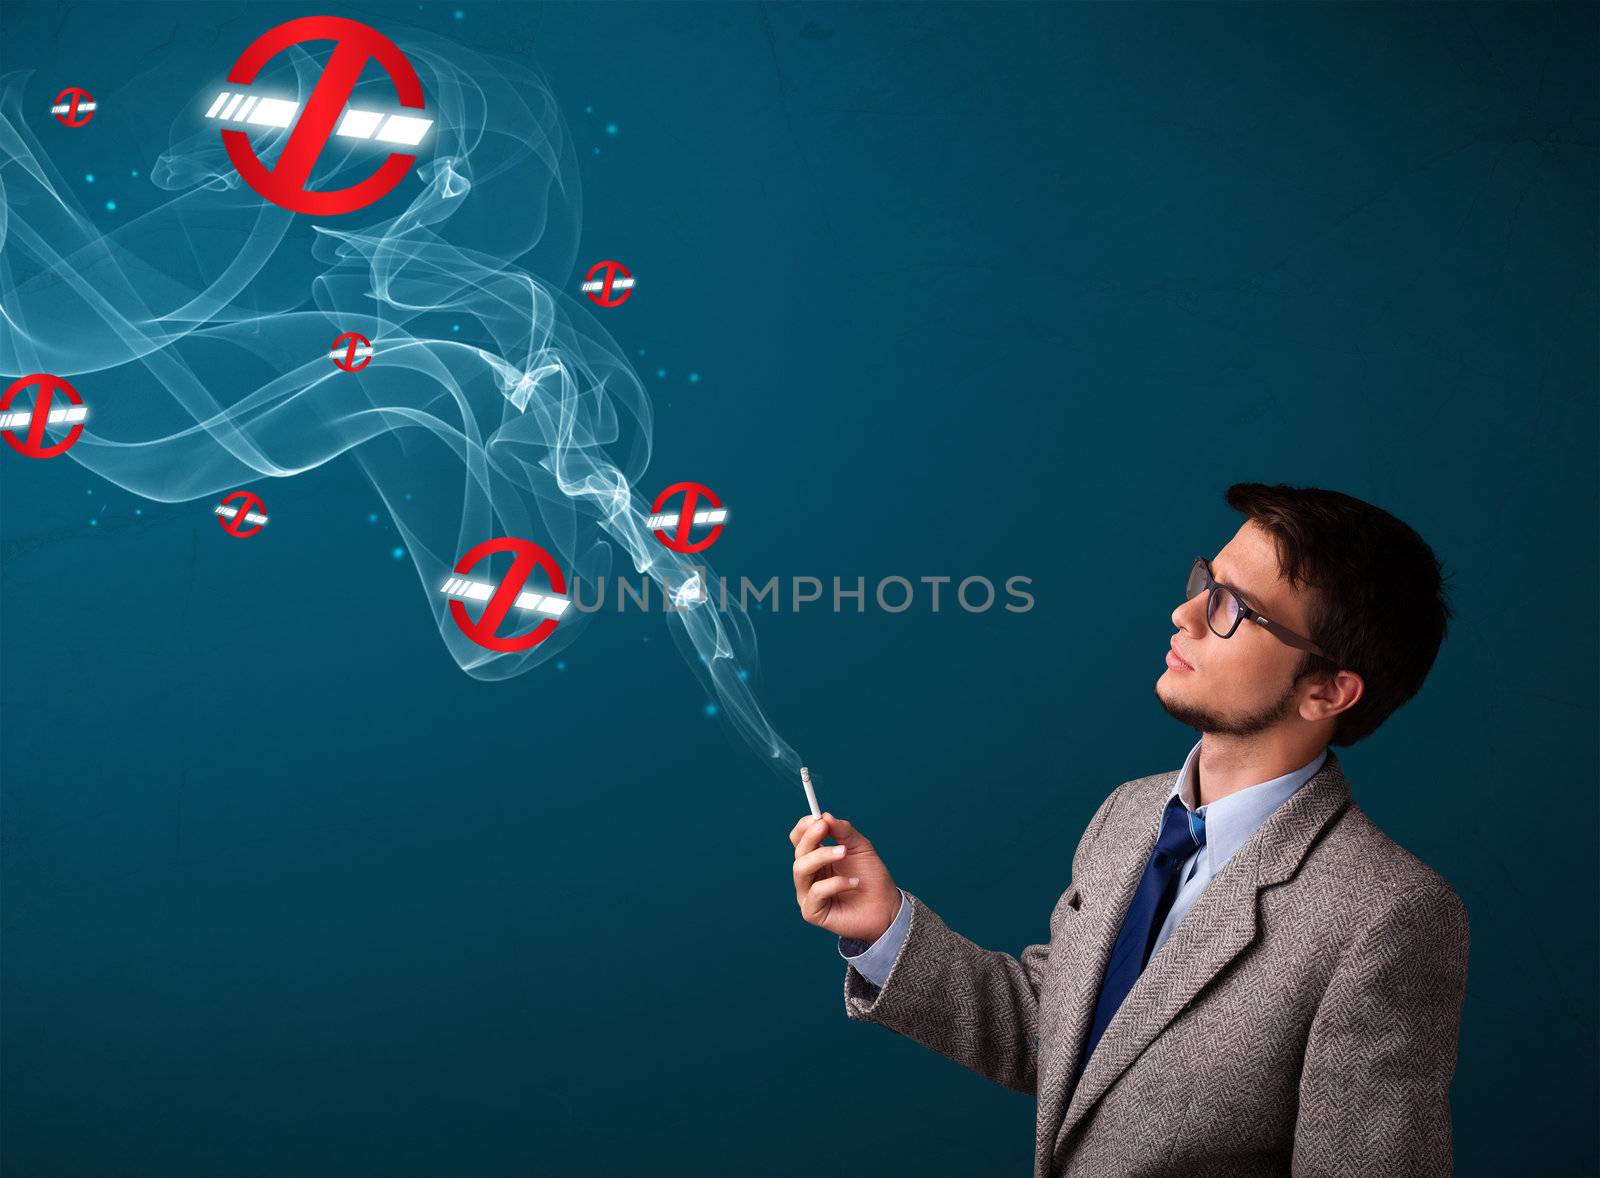 Attractive man smoking dangerous cigarette with no smoking signs by ra2studio